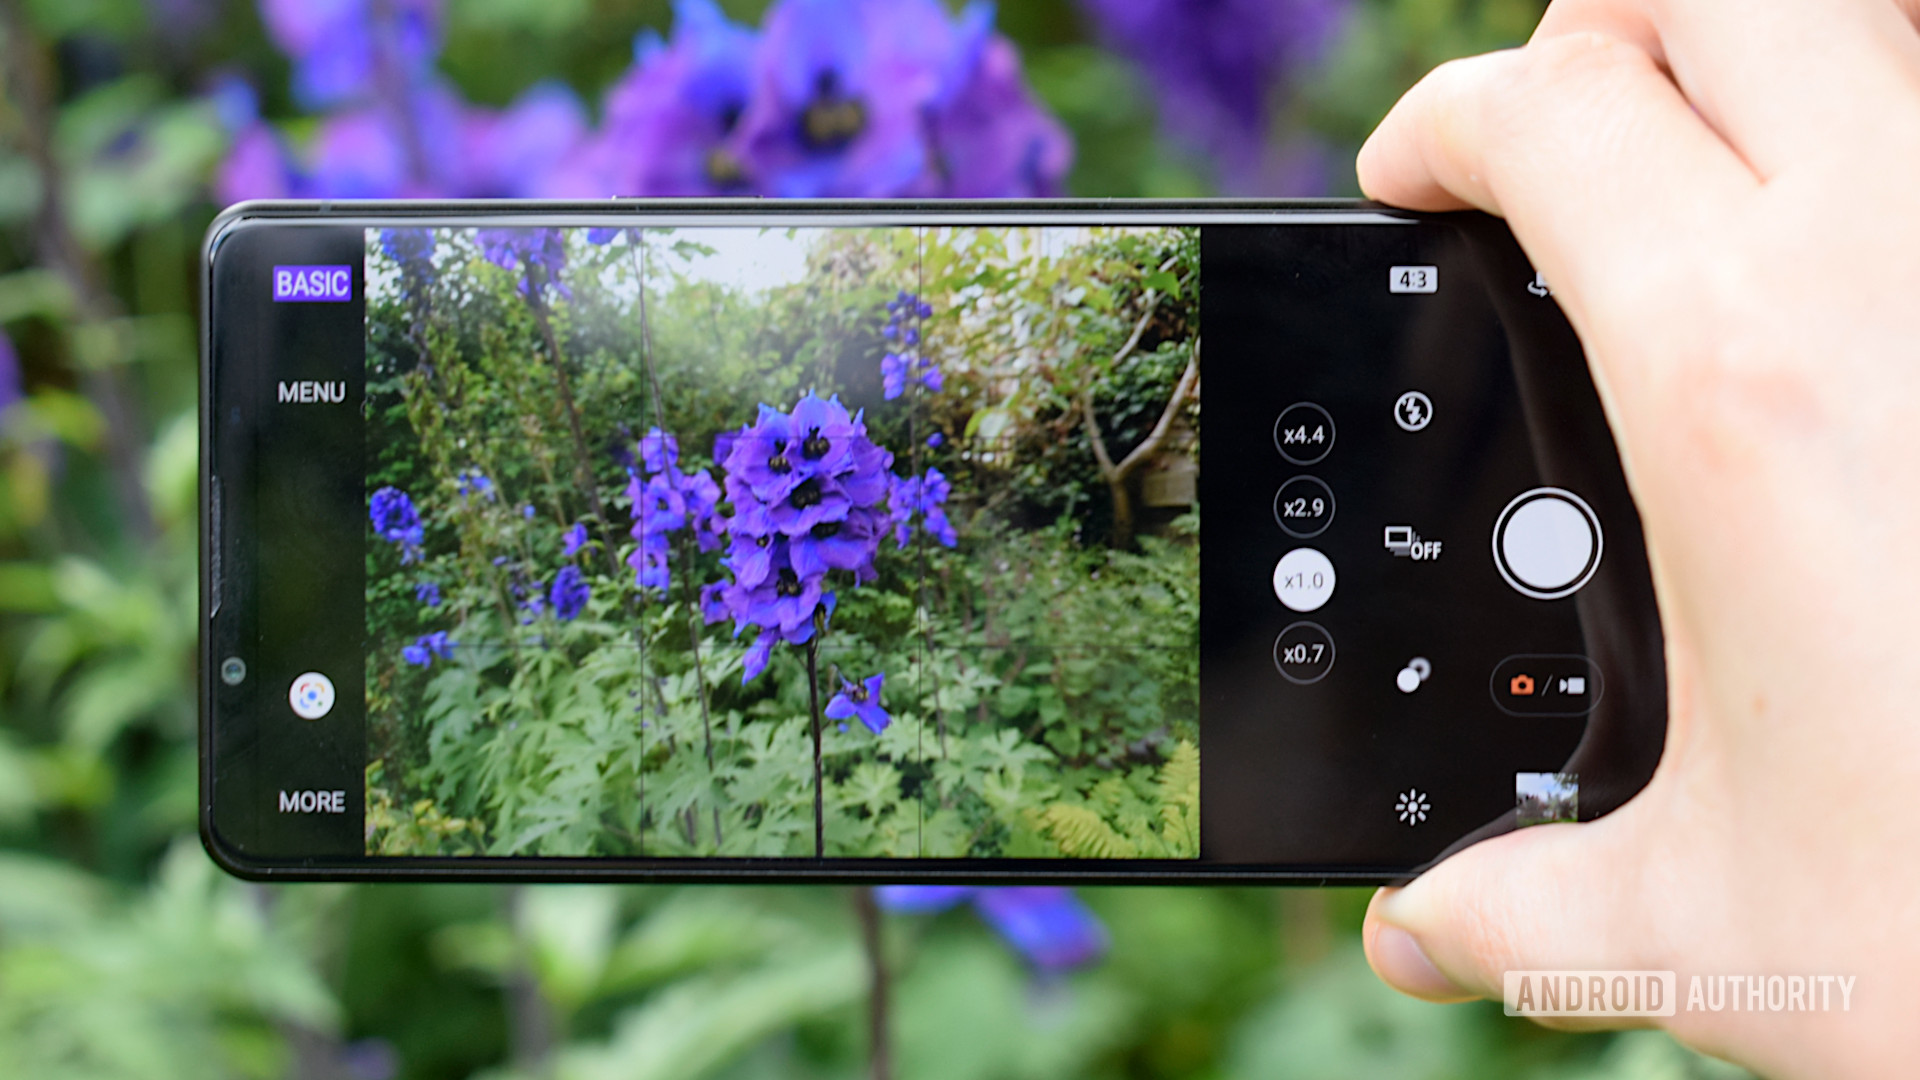 The Sony Xperia 1 III camera app taking a photo of some blue flowers.